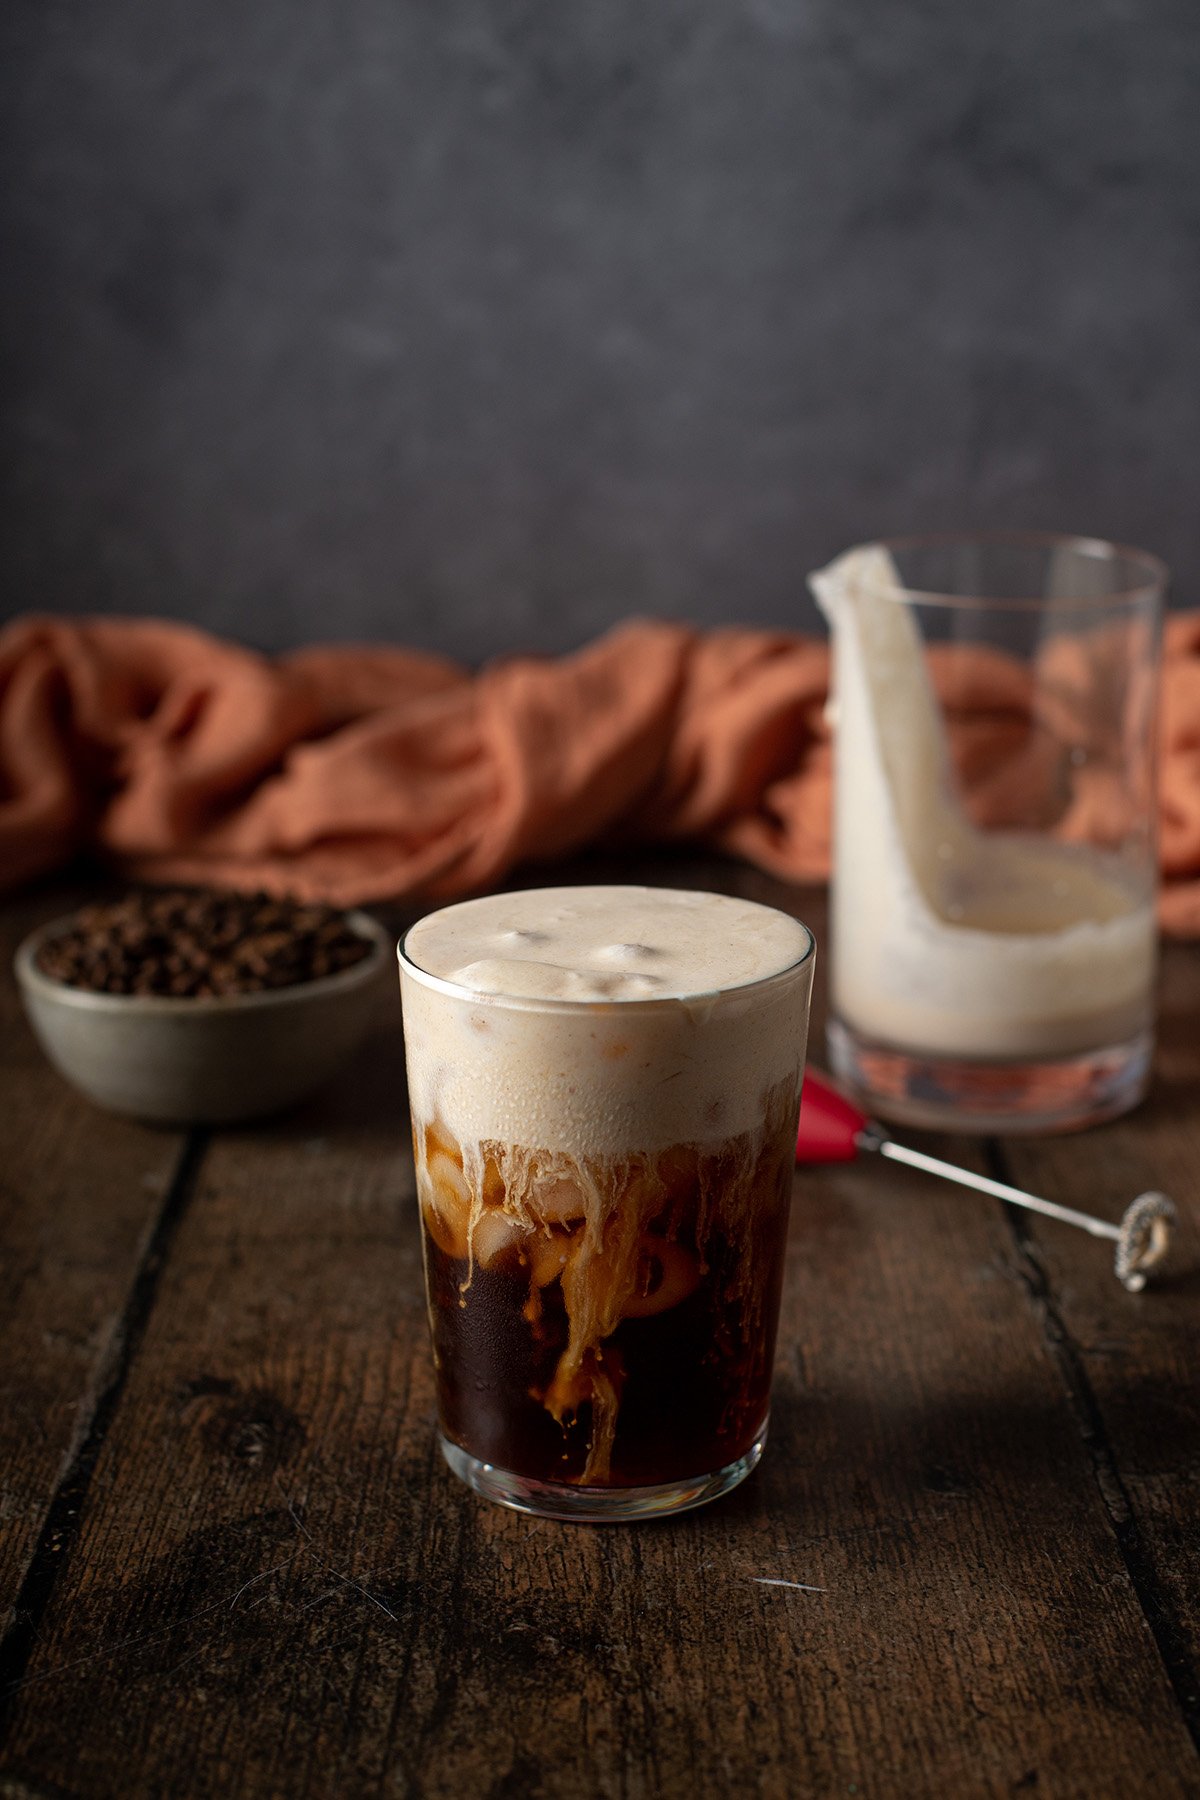 An iced coffee with whipped cream and coffee beans on a wooden table.